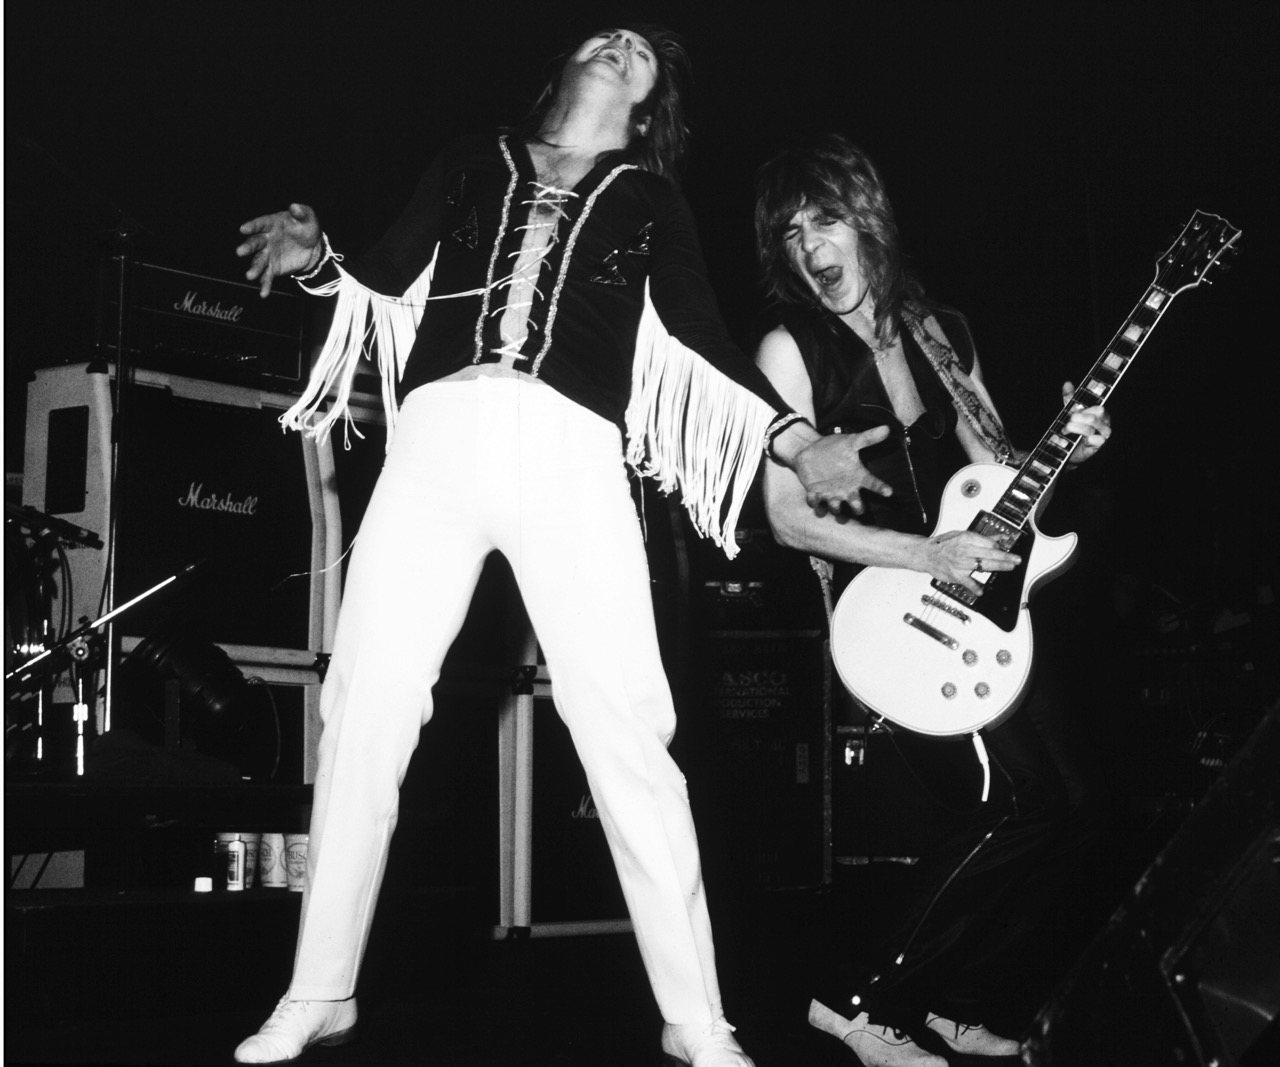  Ozzy Osbourne and Randy Rhoads at at the Capitol Theater in Passaic, New Jersey on April 24, 1981